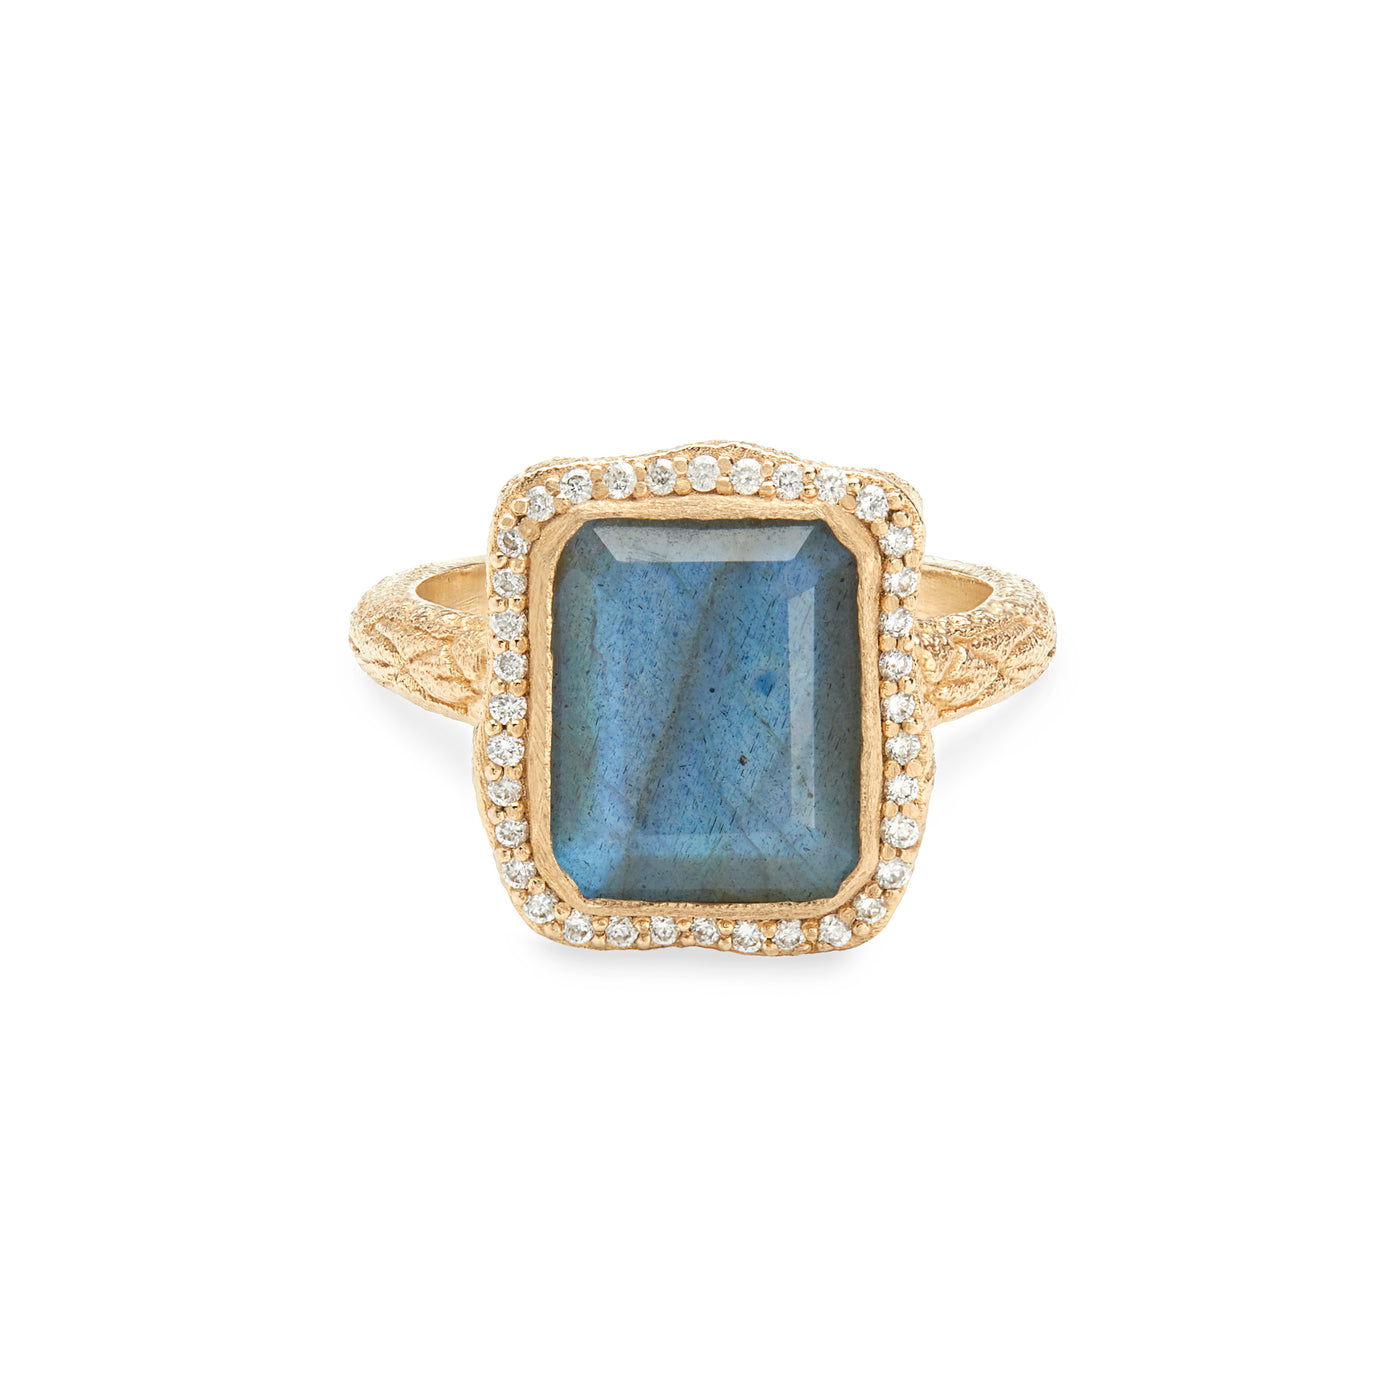 14 Karat Yellow Gold Ring with Rectangle  Shaped Labradorite Stone with Halo of White Diamonds Against White Background